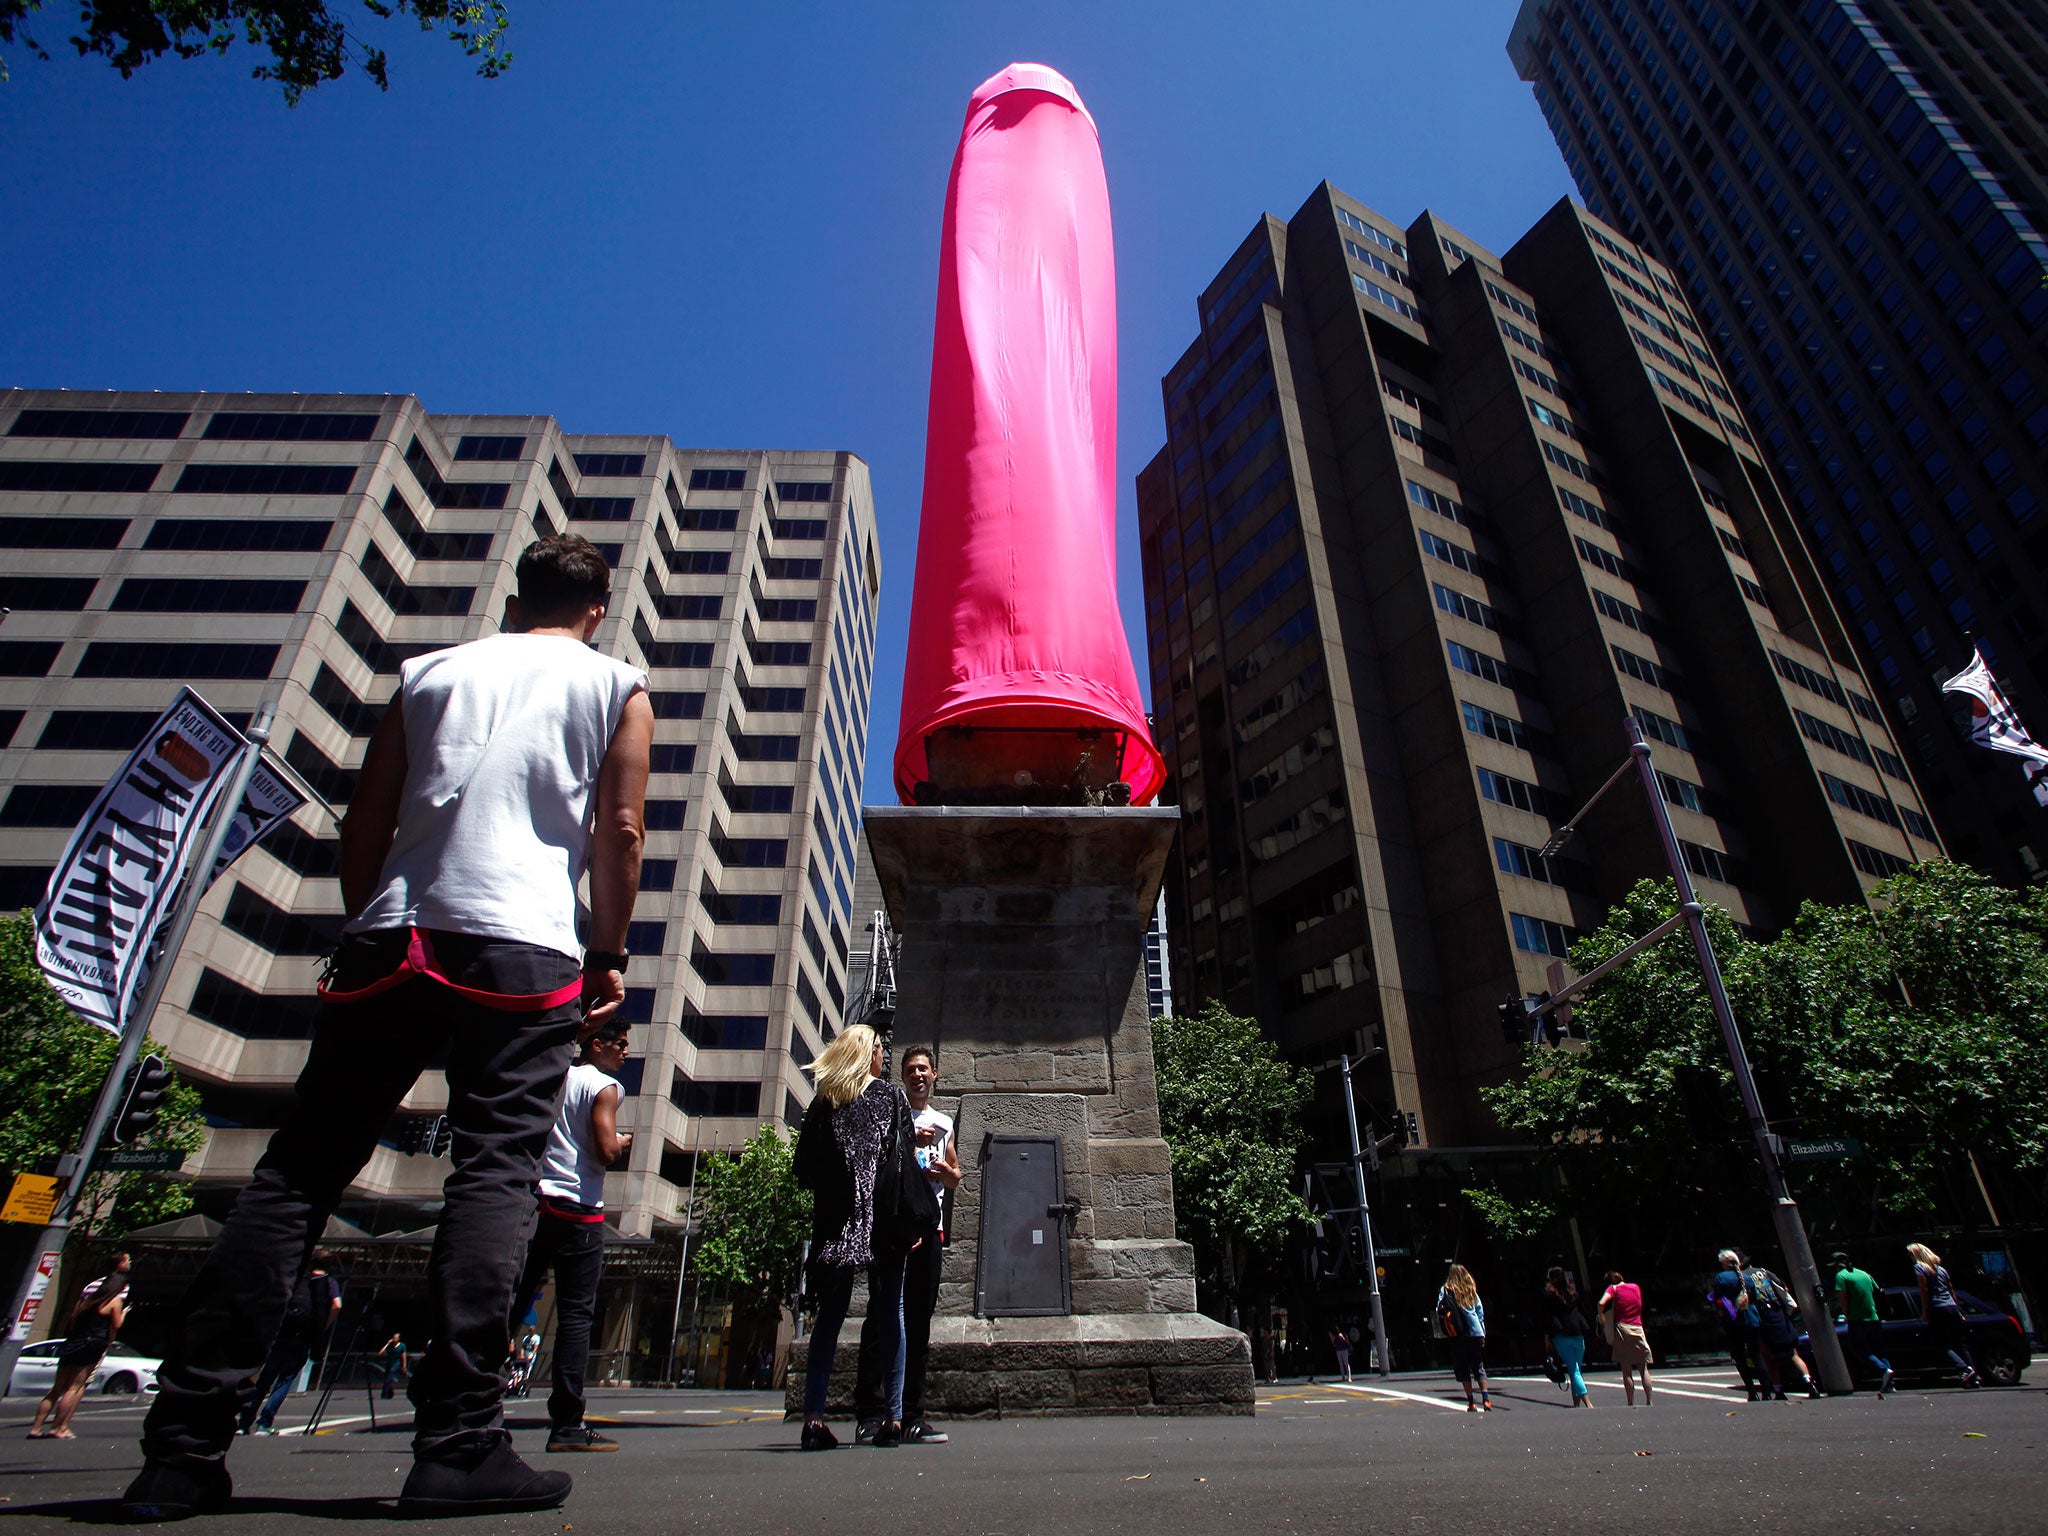 Giant pink condom erected in Sydney as part of HIV awareness campaign